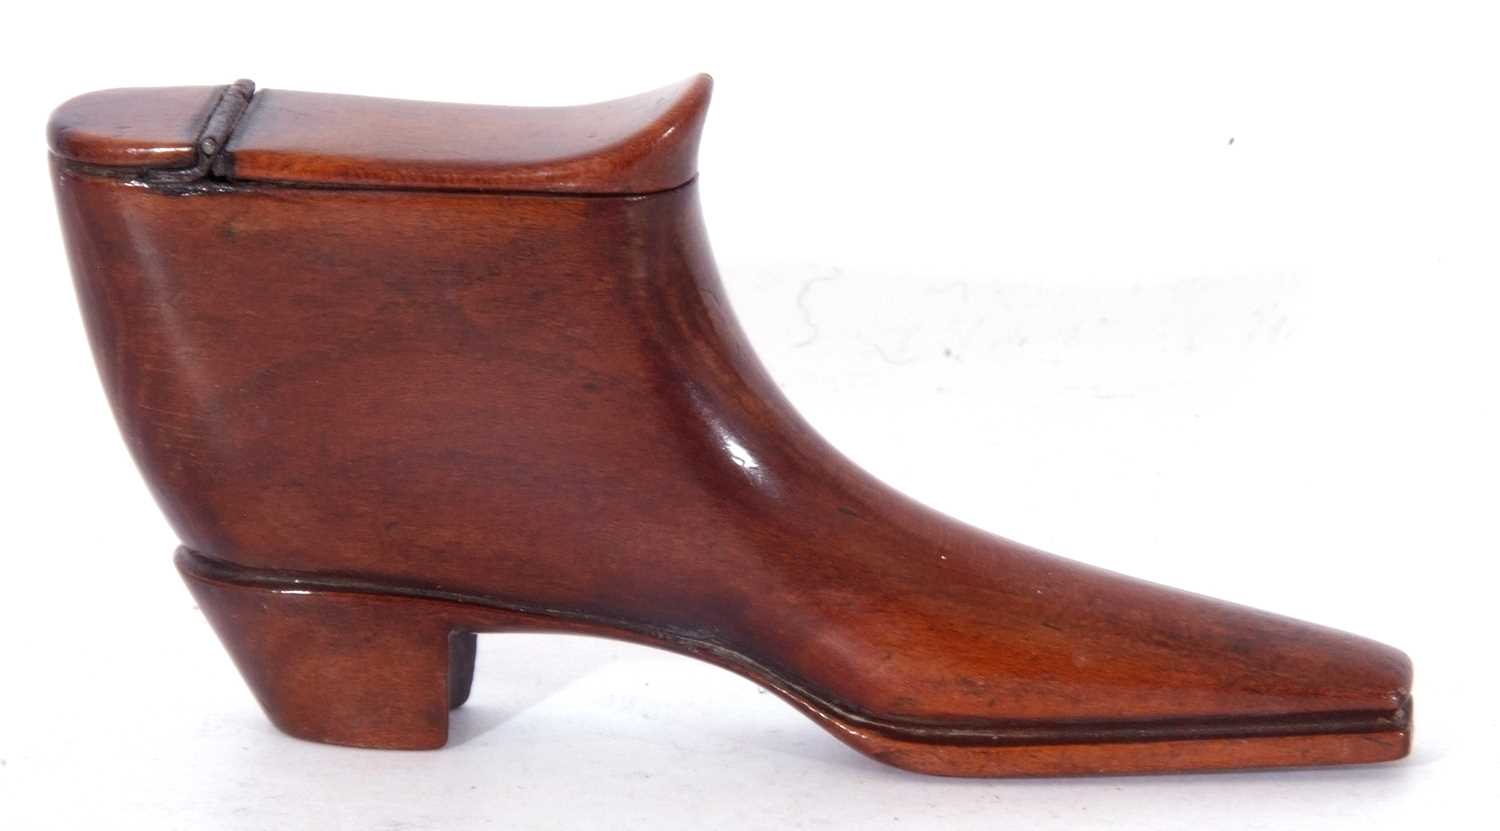 Novelty 19th century snuff box in the form of a boot fitted with hinged lid